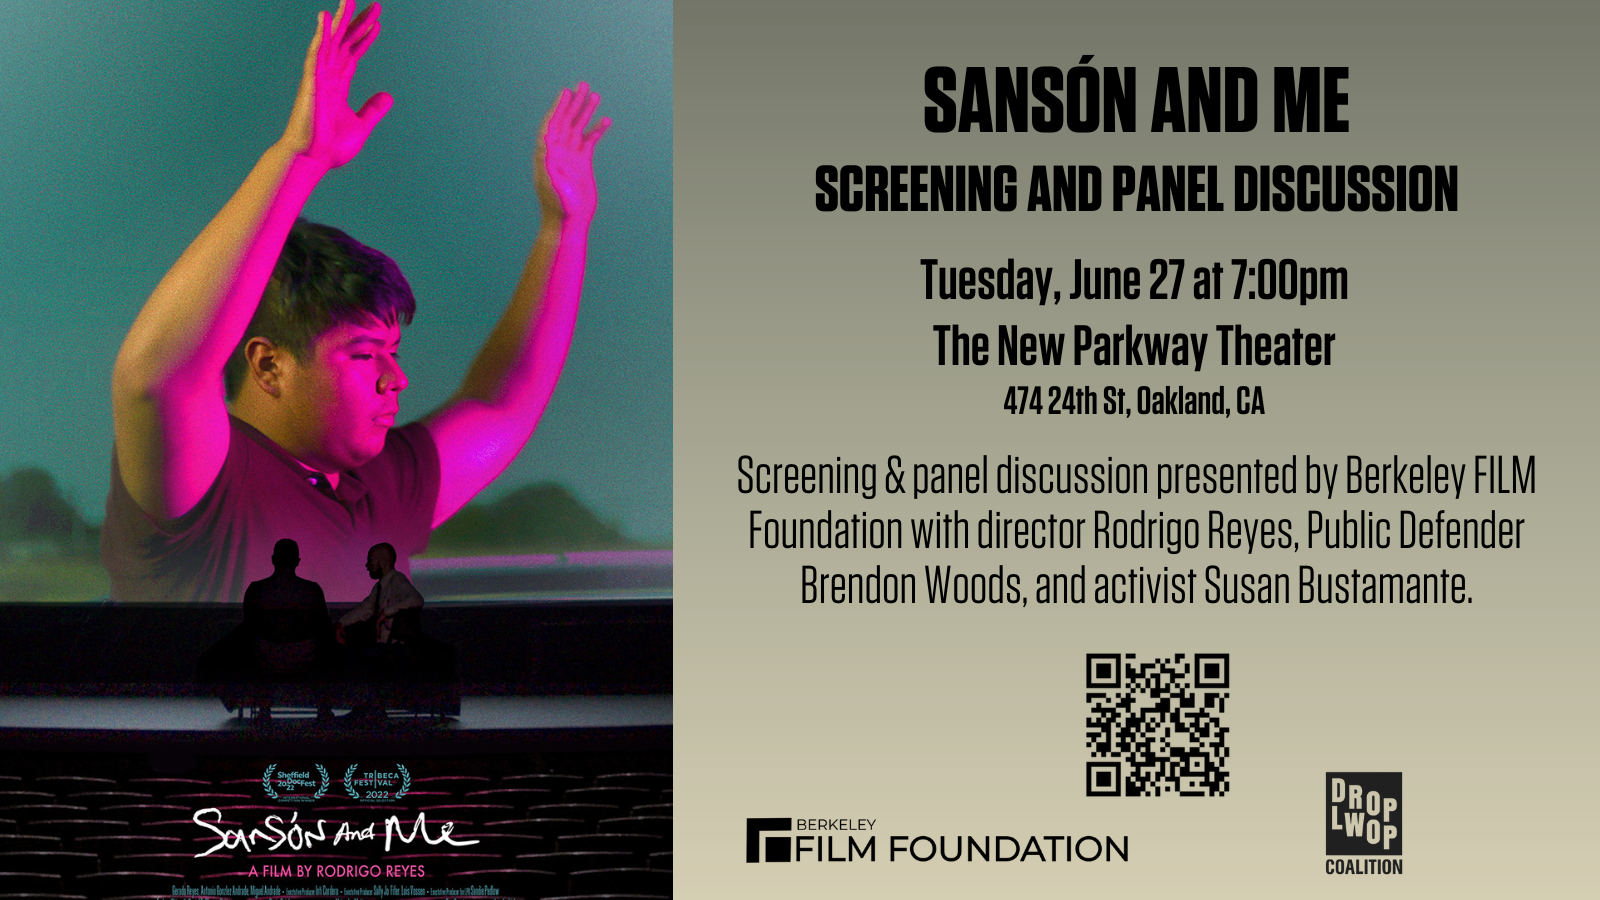 Film screening promo image featuring poster of boy with arms raised lit by a pink light, and title on the left Sanson and Me at the New Parkway Theater